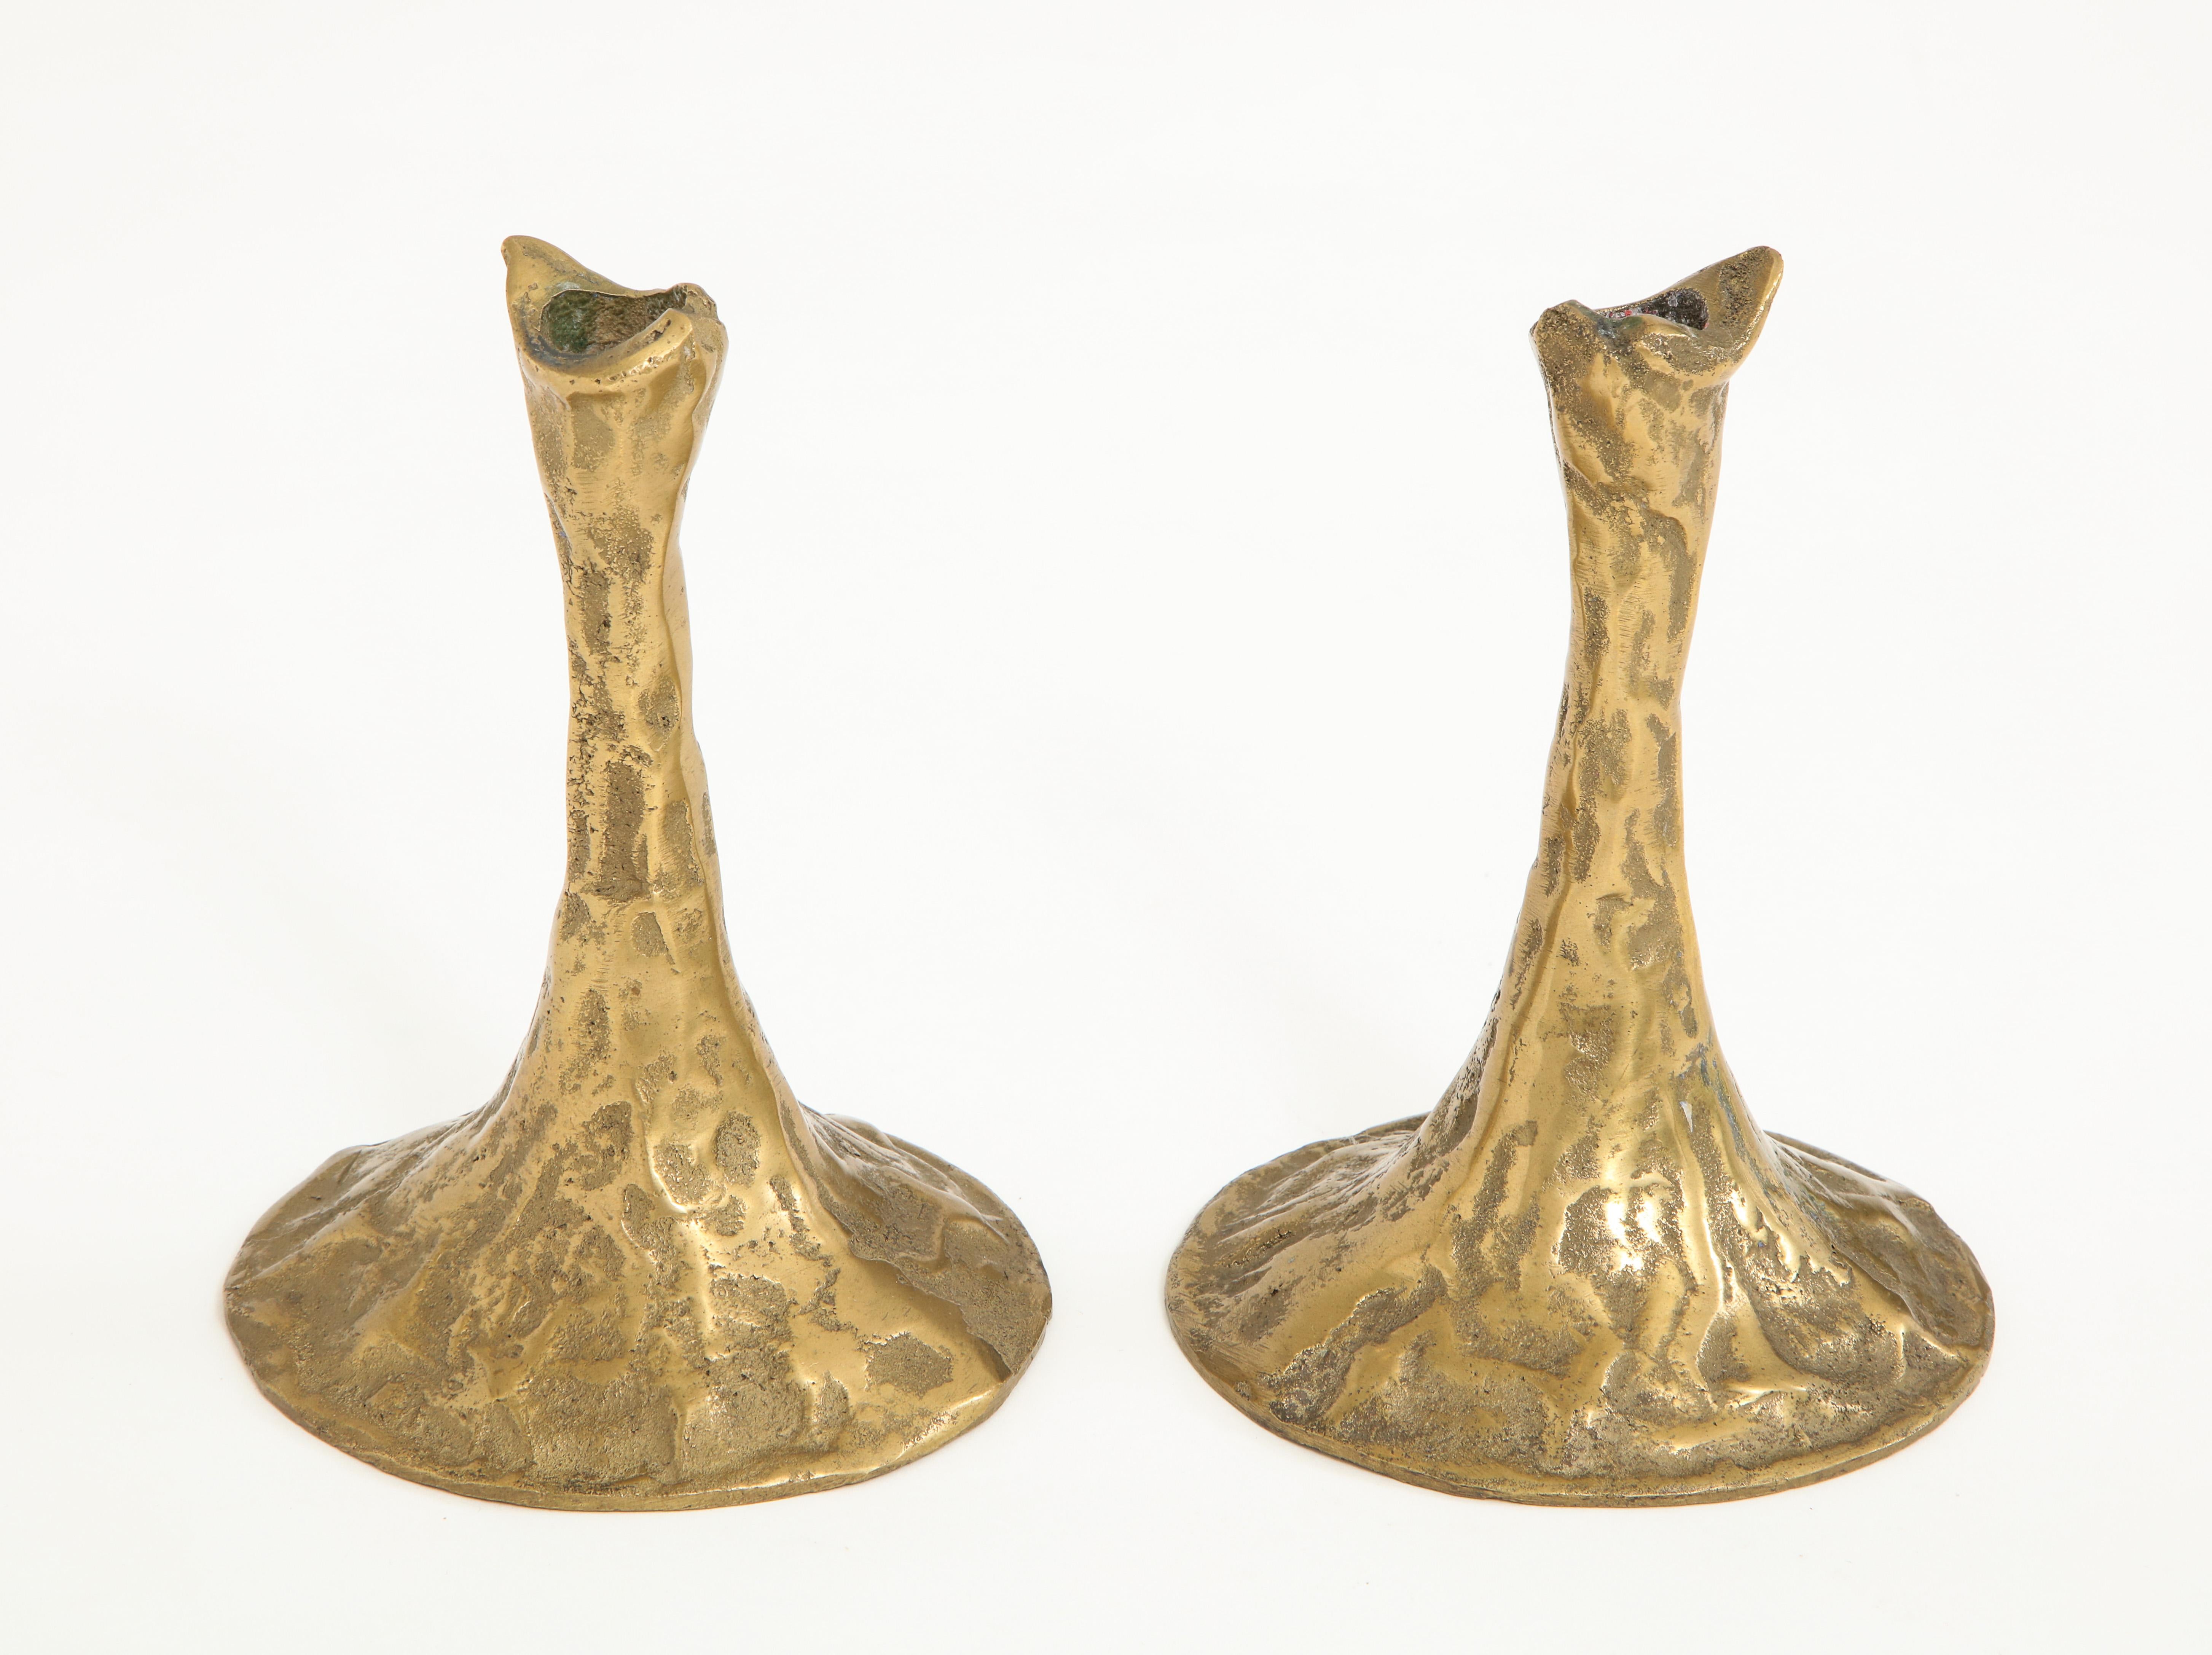 Exquisite pair of bronze candlestick holders by acclaimed post-war sculptor Costas Coulentianos. 

Abstract in both composition and finish, these candlestick holders are highly reminiscent of work made by Brancusi and other pioneering modernists who